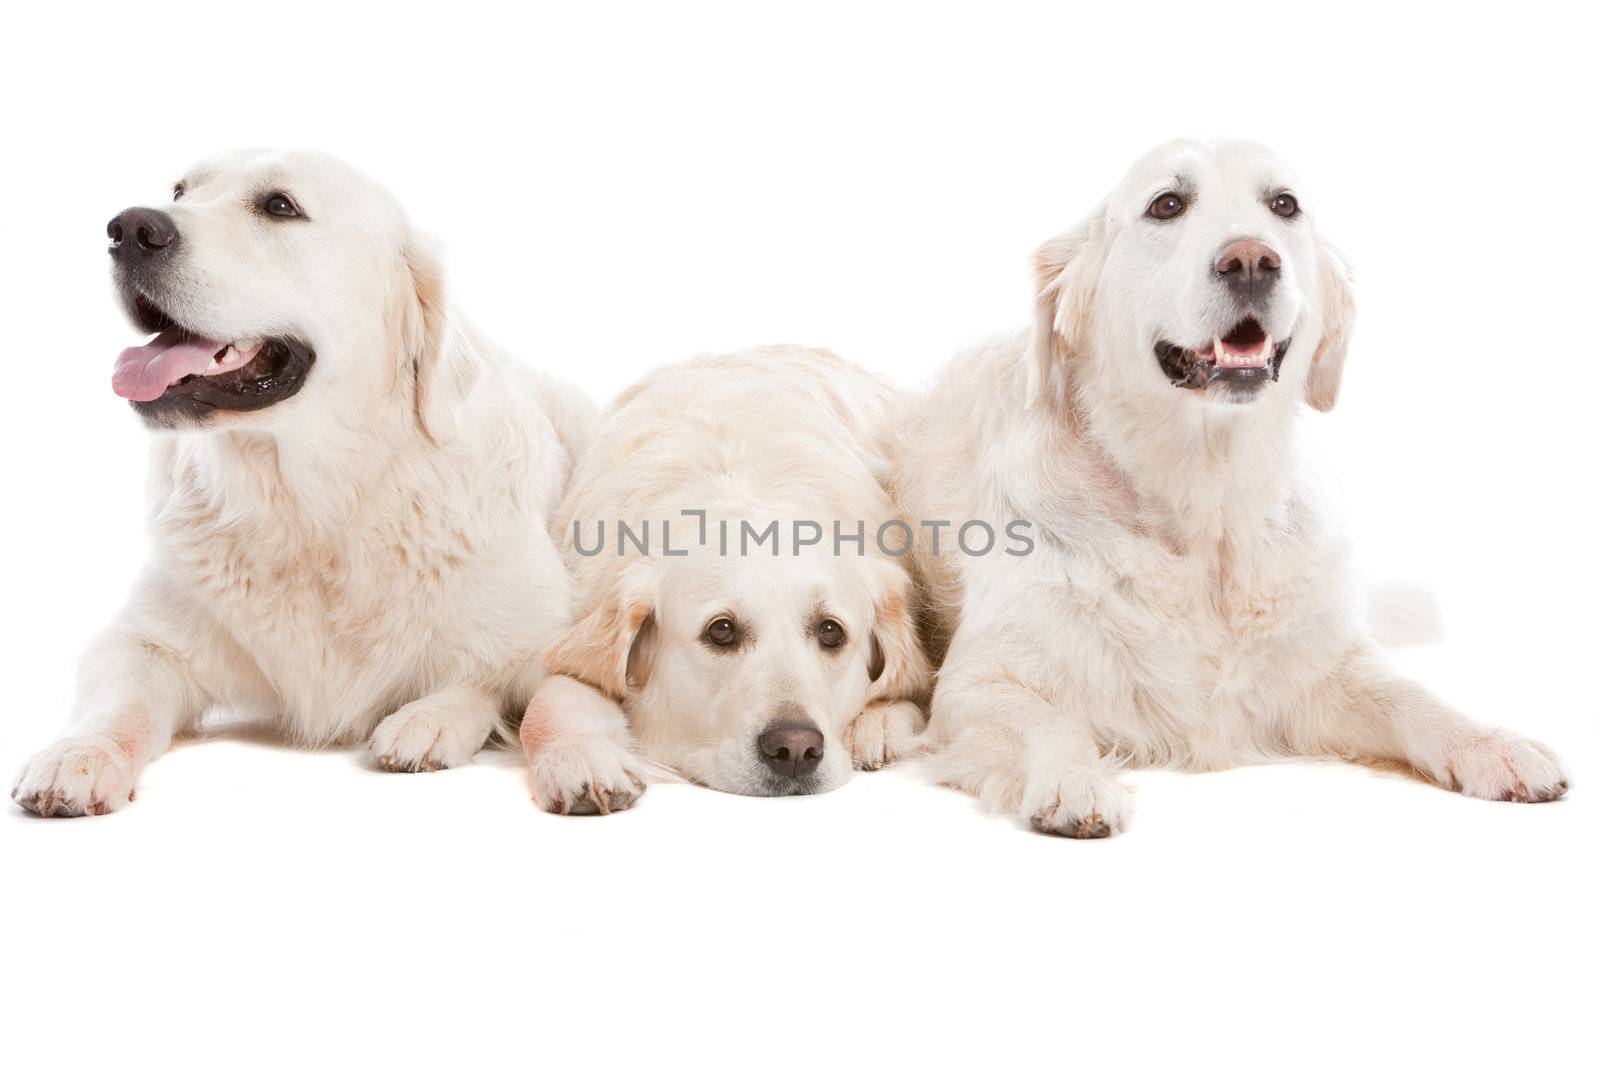 Three golden retriever dogs lying together on white background